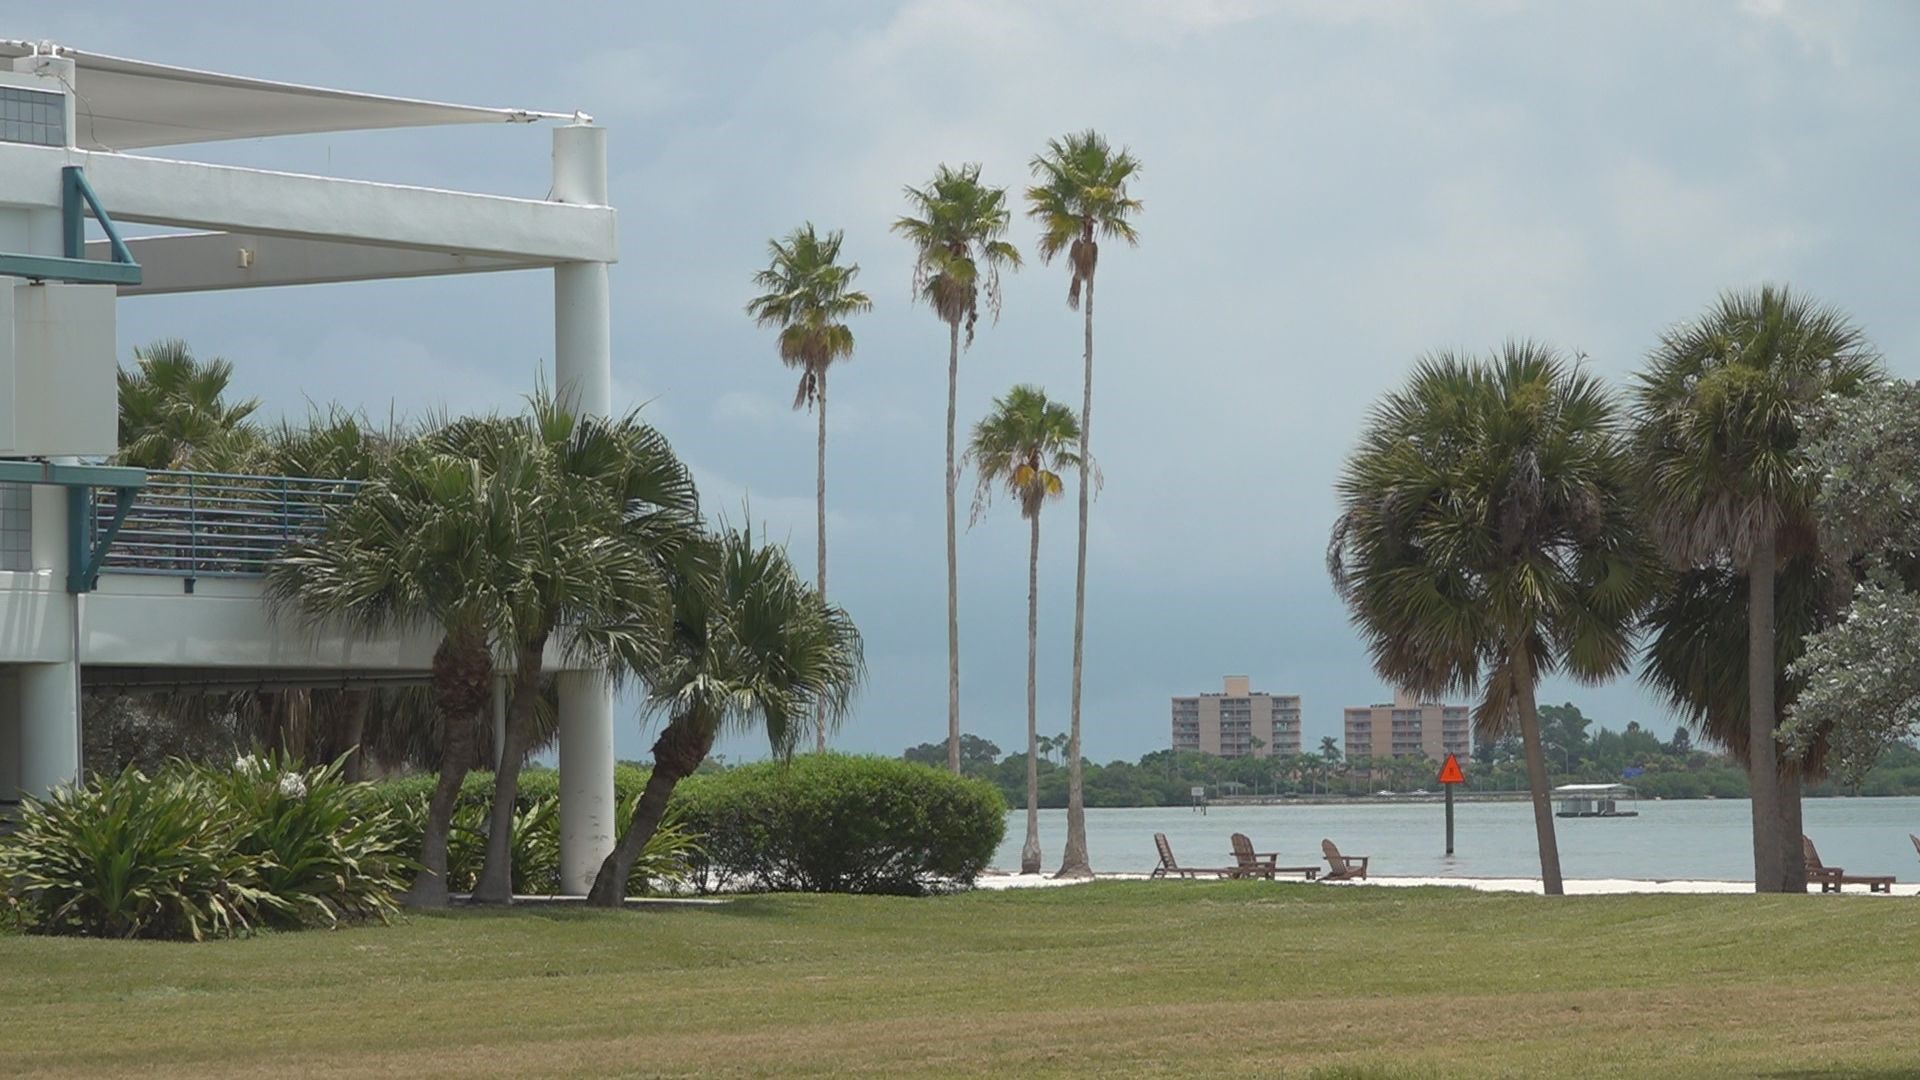 Despite the Florida heat, Eckerd College says its scenic campus provides plenty of shaded locations for learning.